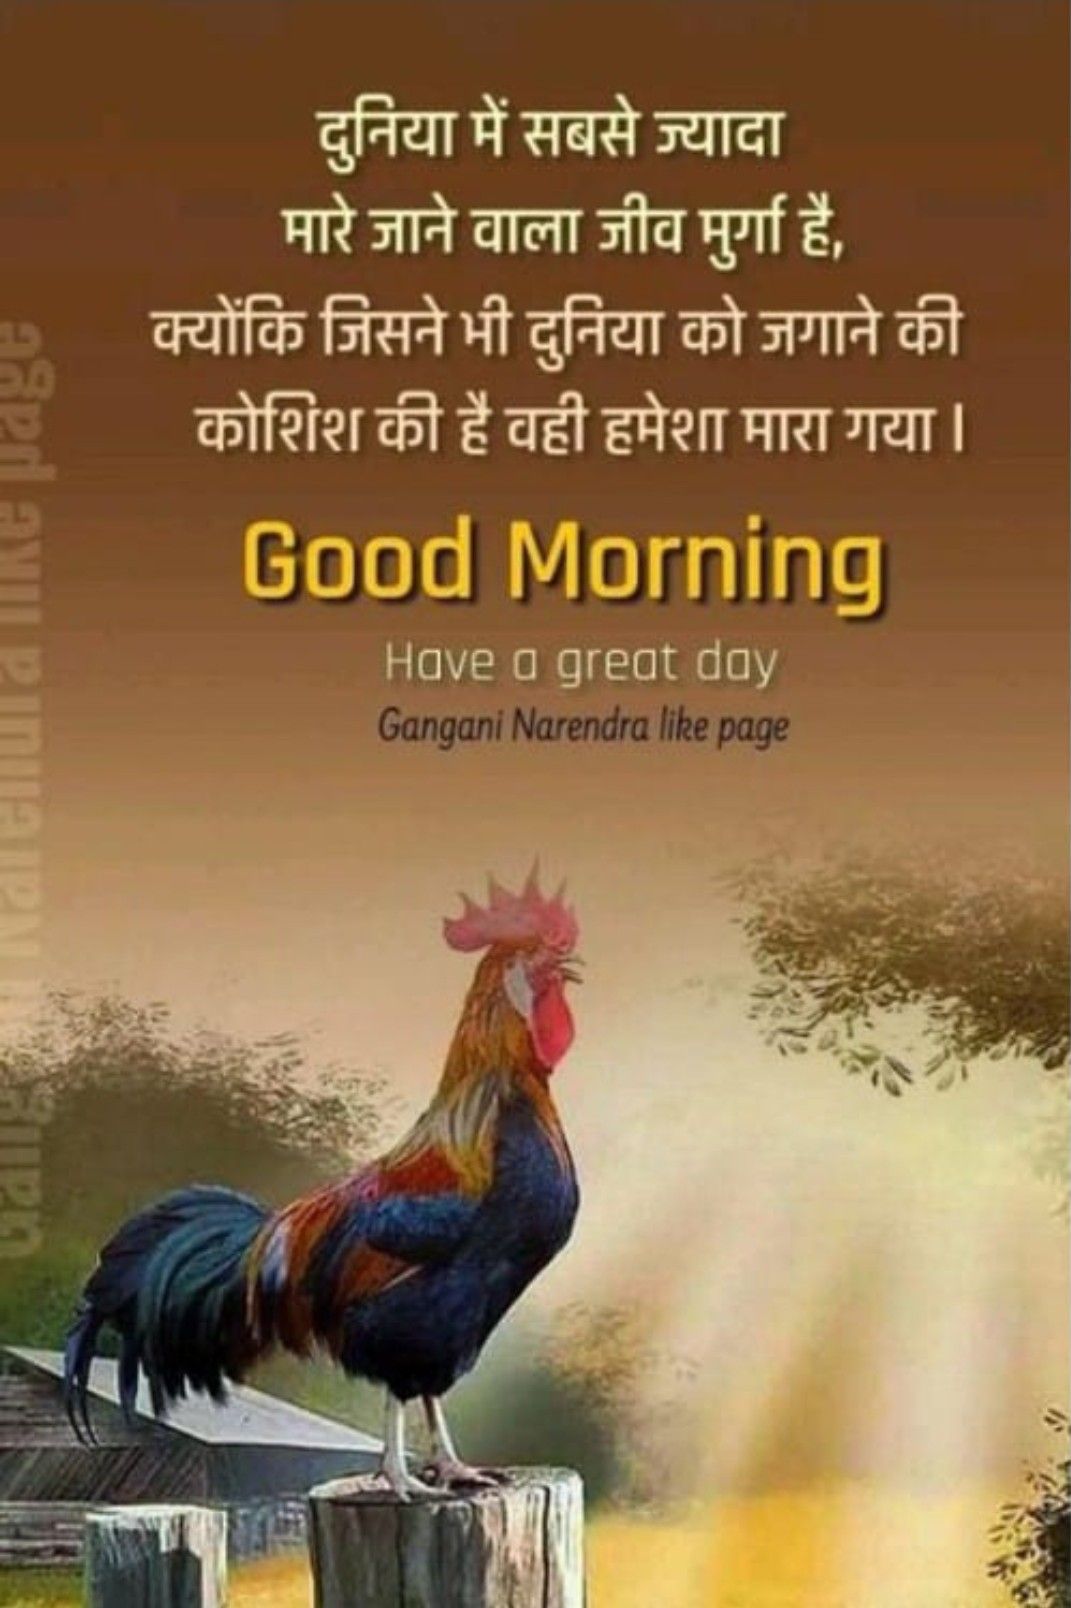 Good Morning Images with Quotes for Whatsapp in Hindi 5